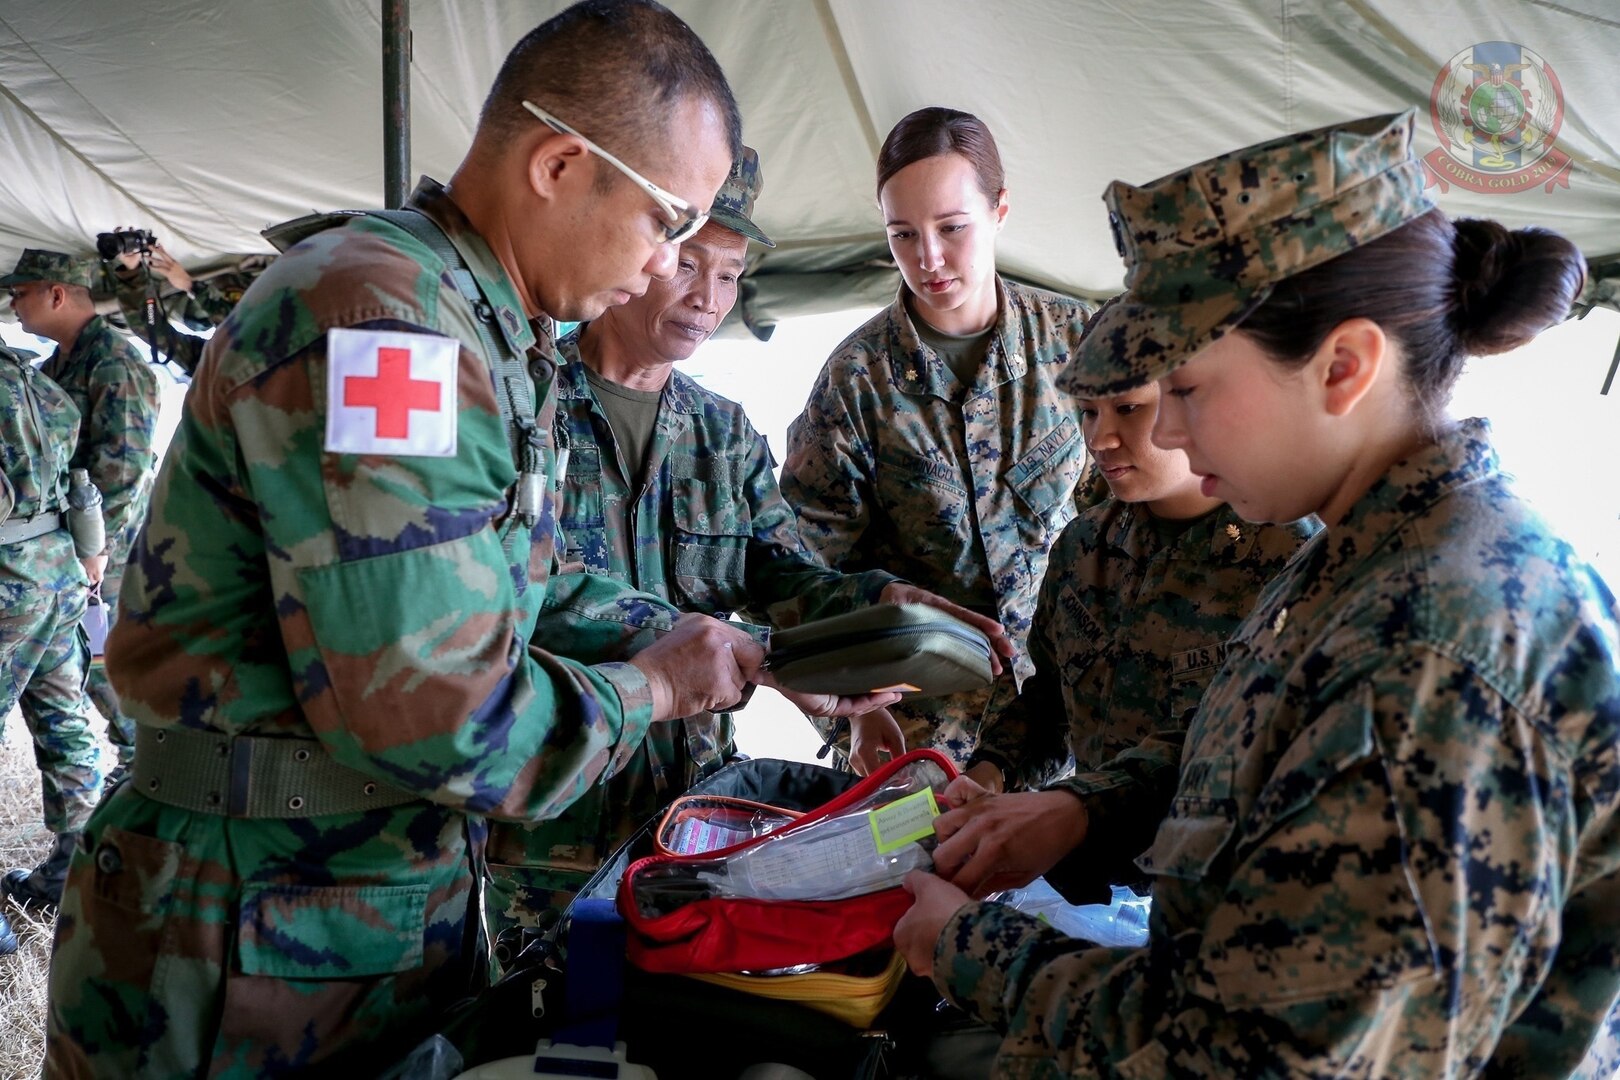 Military medical personnel open gear beneath a tent.